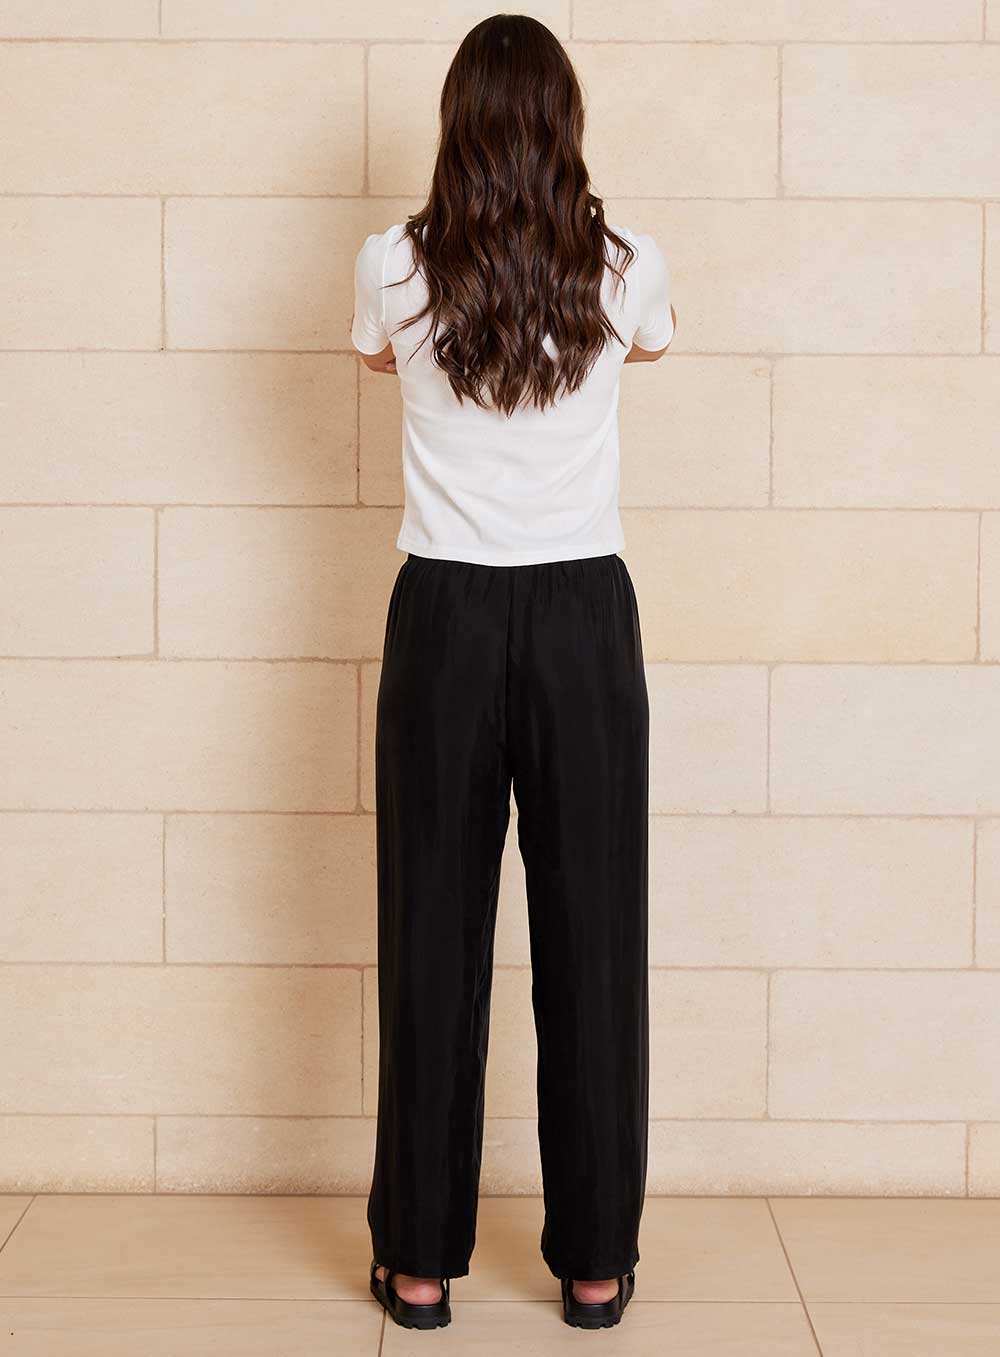 The Chloe Cupro pant features cupro and viscose blended fabrication with a velvety soft handfeel that creates a draping look, a drawcord waistband, straight leg design with side pockets.